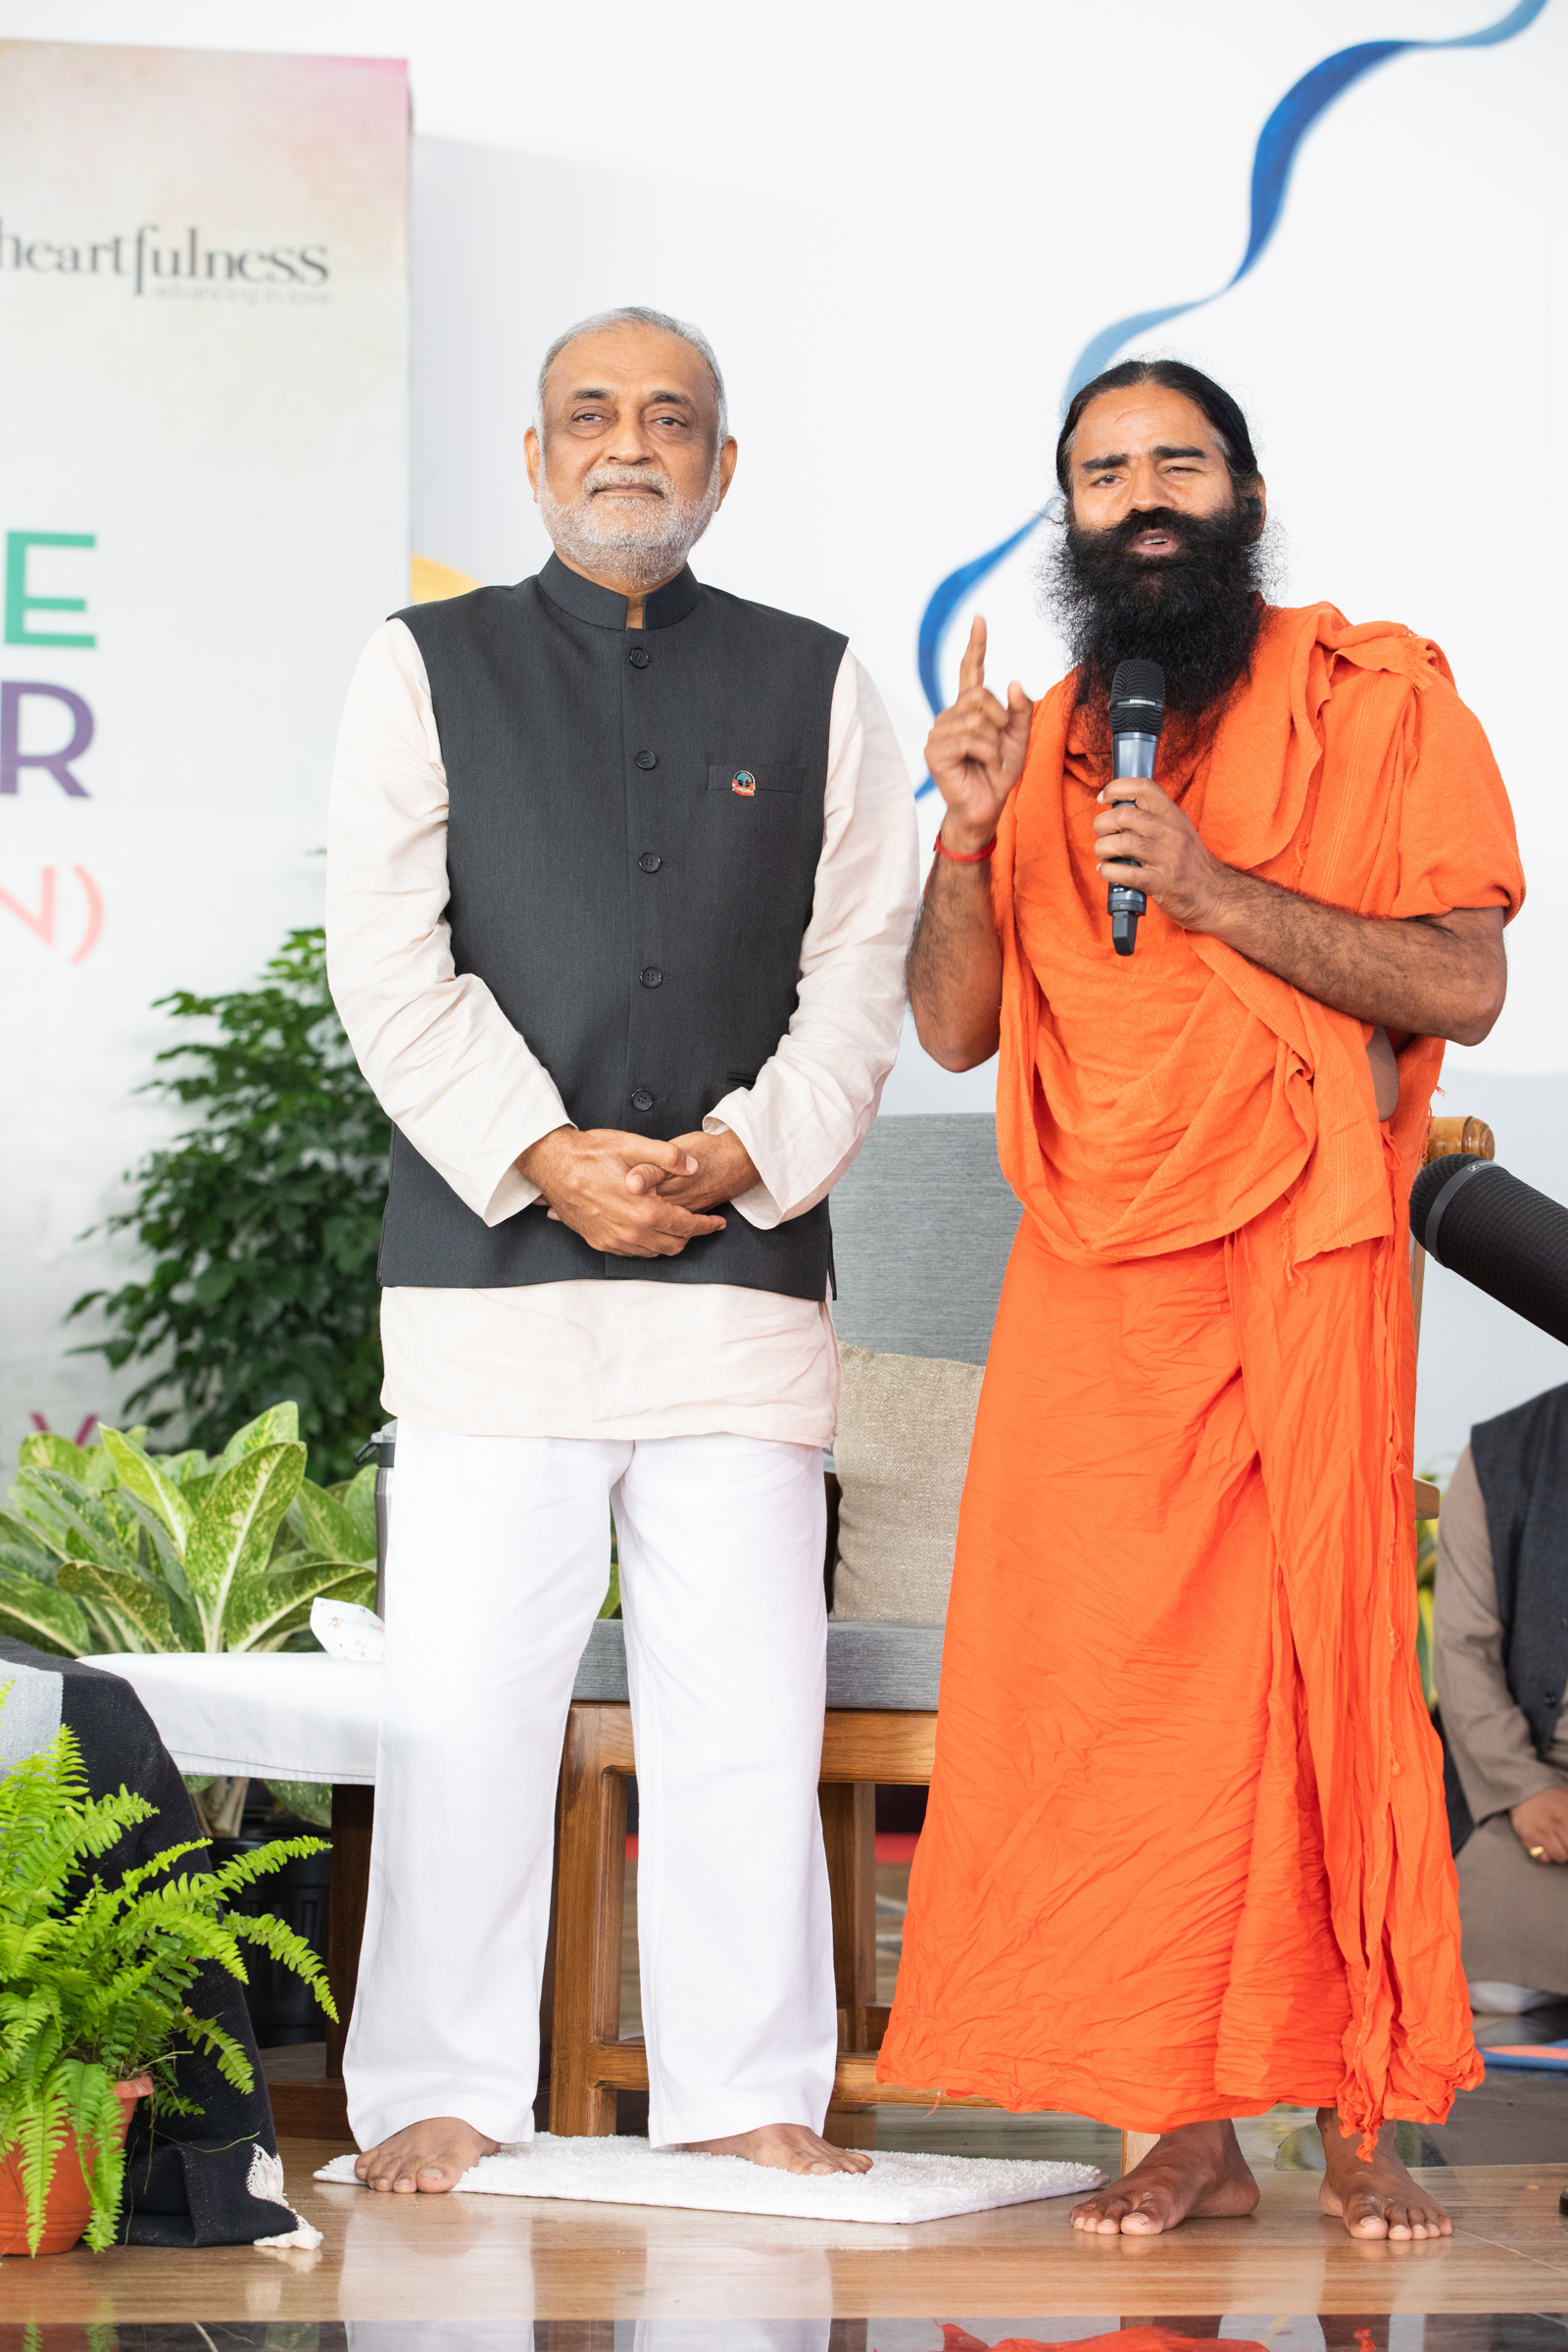 Heartfulness Institute along with Patanjali, National Yogasana Sports Federation Kreeda Bharati, Geeta Parivar New Year With Plethora of Initiatives aimed at Promoting And making Yoga more accessible